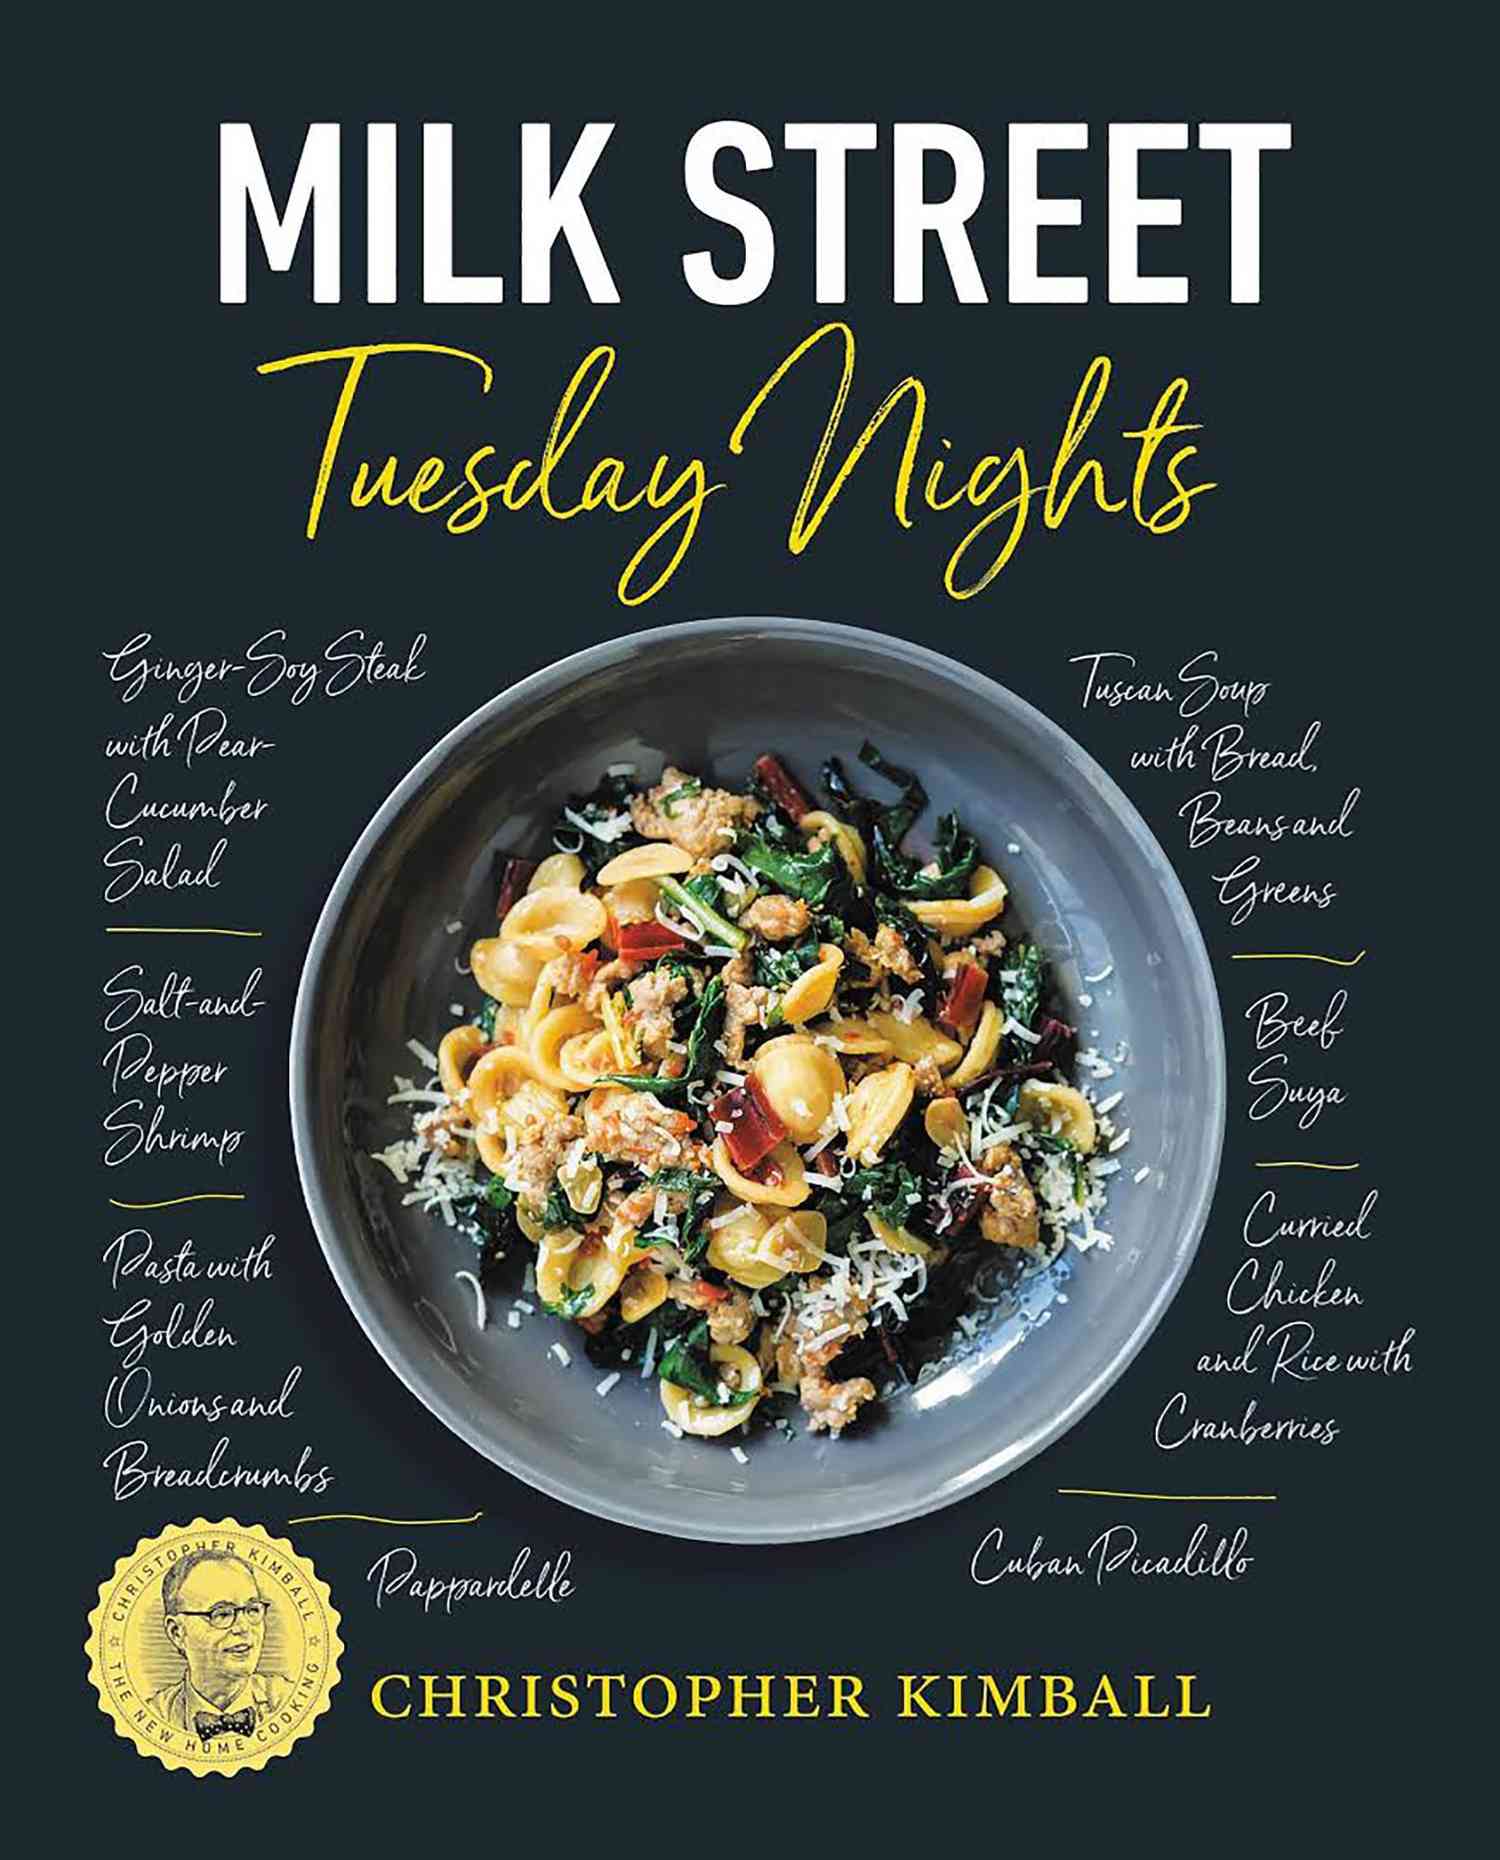 Milk Street: Tuesday Nights, by Christopher Kimball&nbsp;